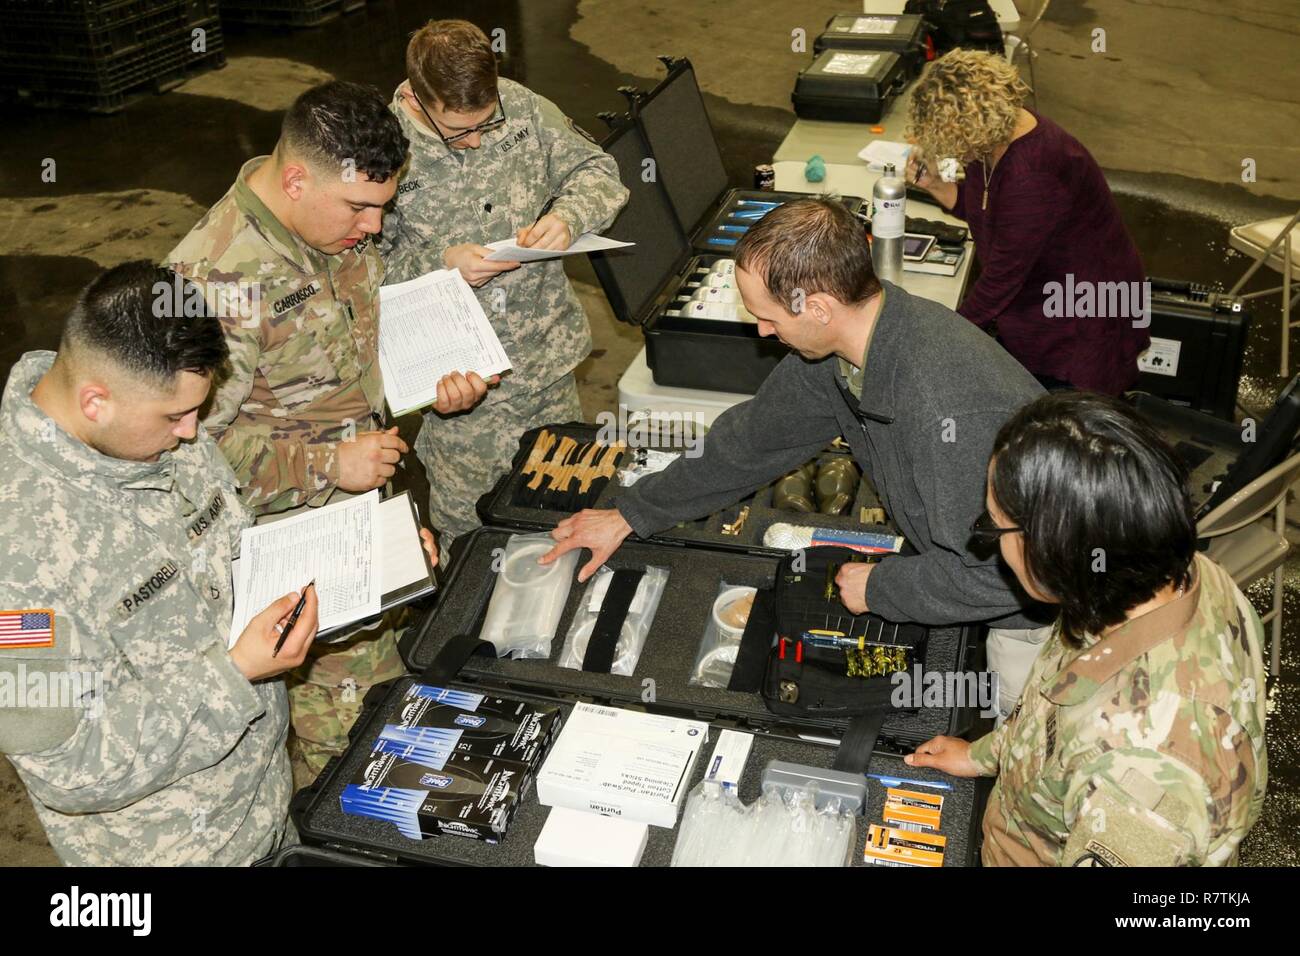 Soldiers of 10th Mountain Division conduct inventory of the parts and components of the new Chemical, Biological, Radiological, Nuclear Dismounted Reconnaissance Sets, Kits and Outfits (CBRN DR at